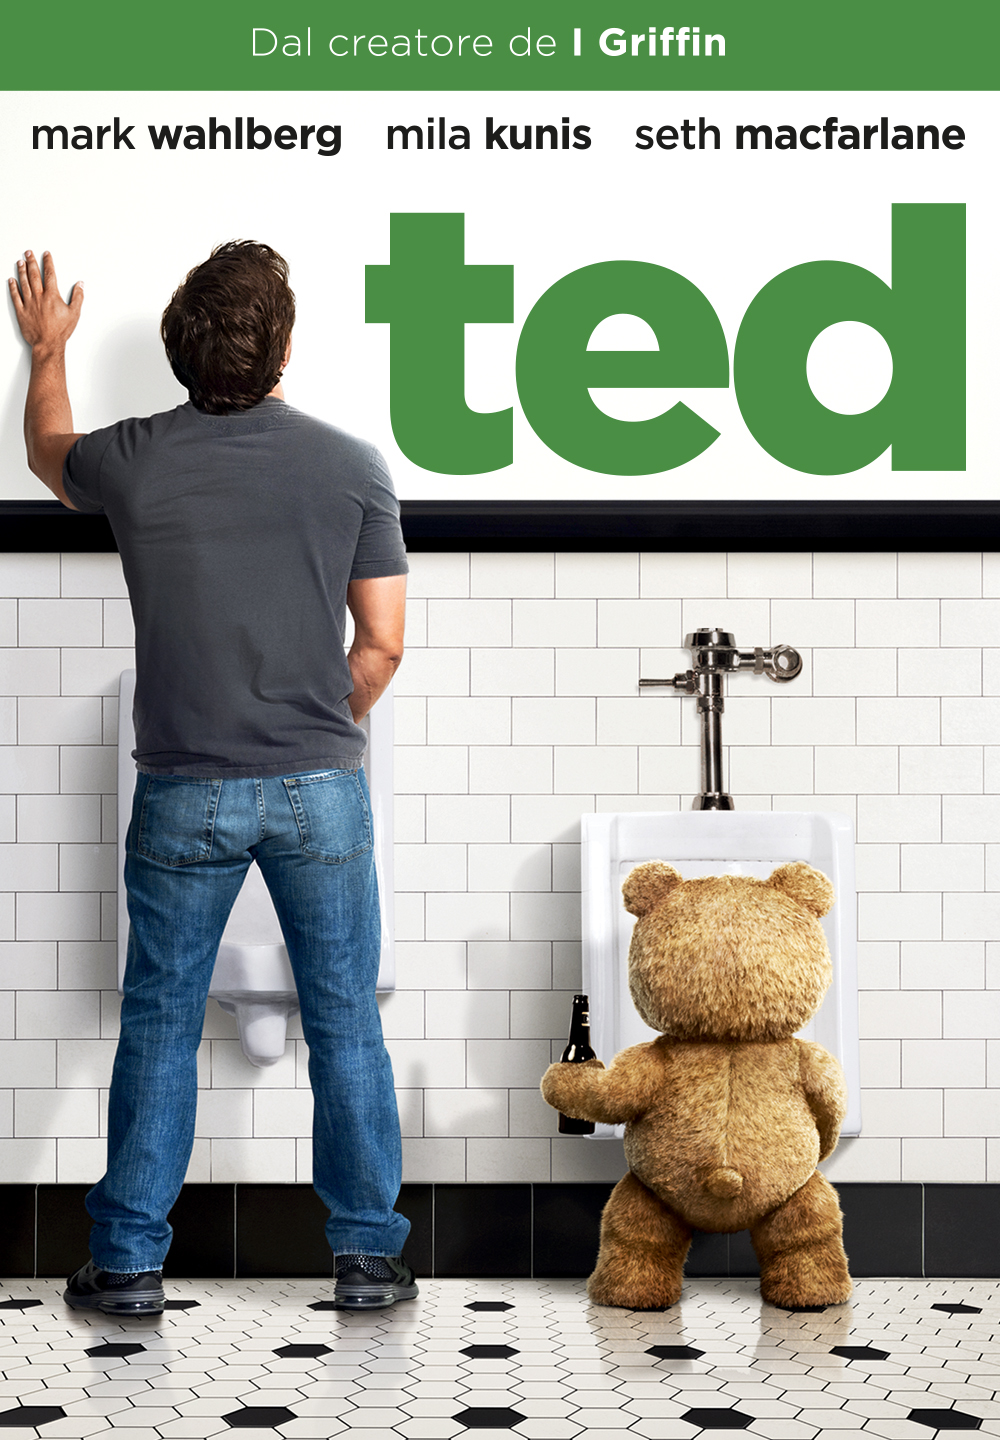 Ted [HD] (2012)